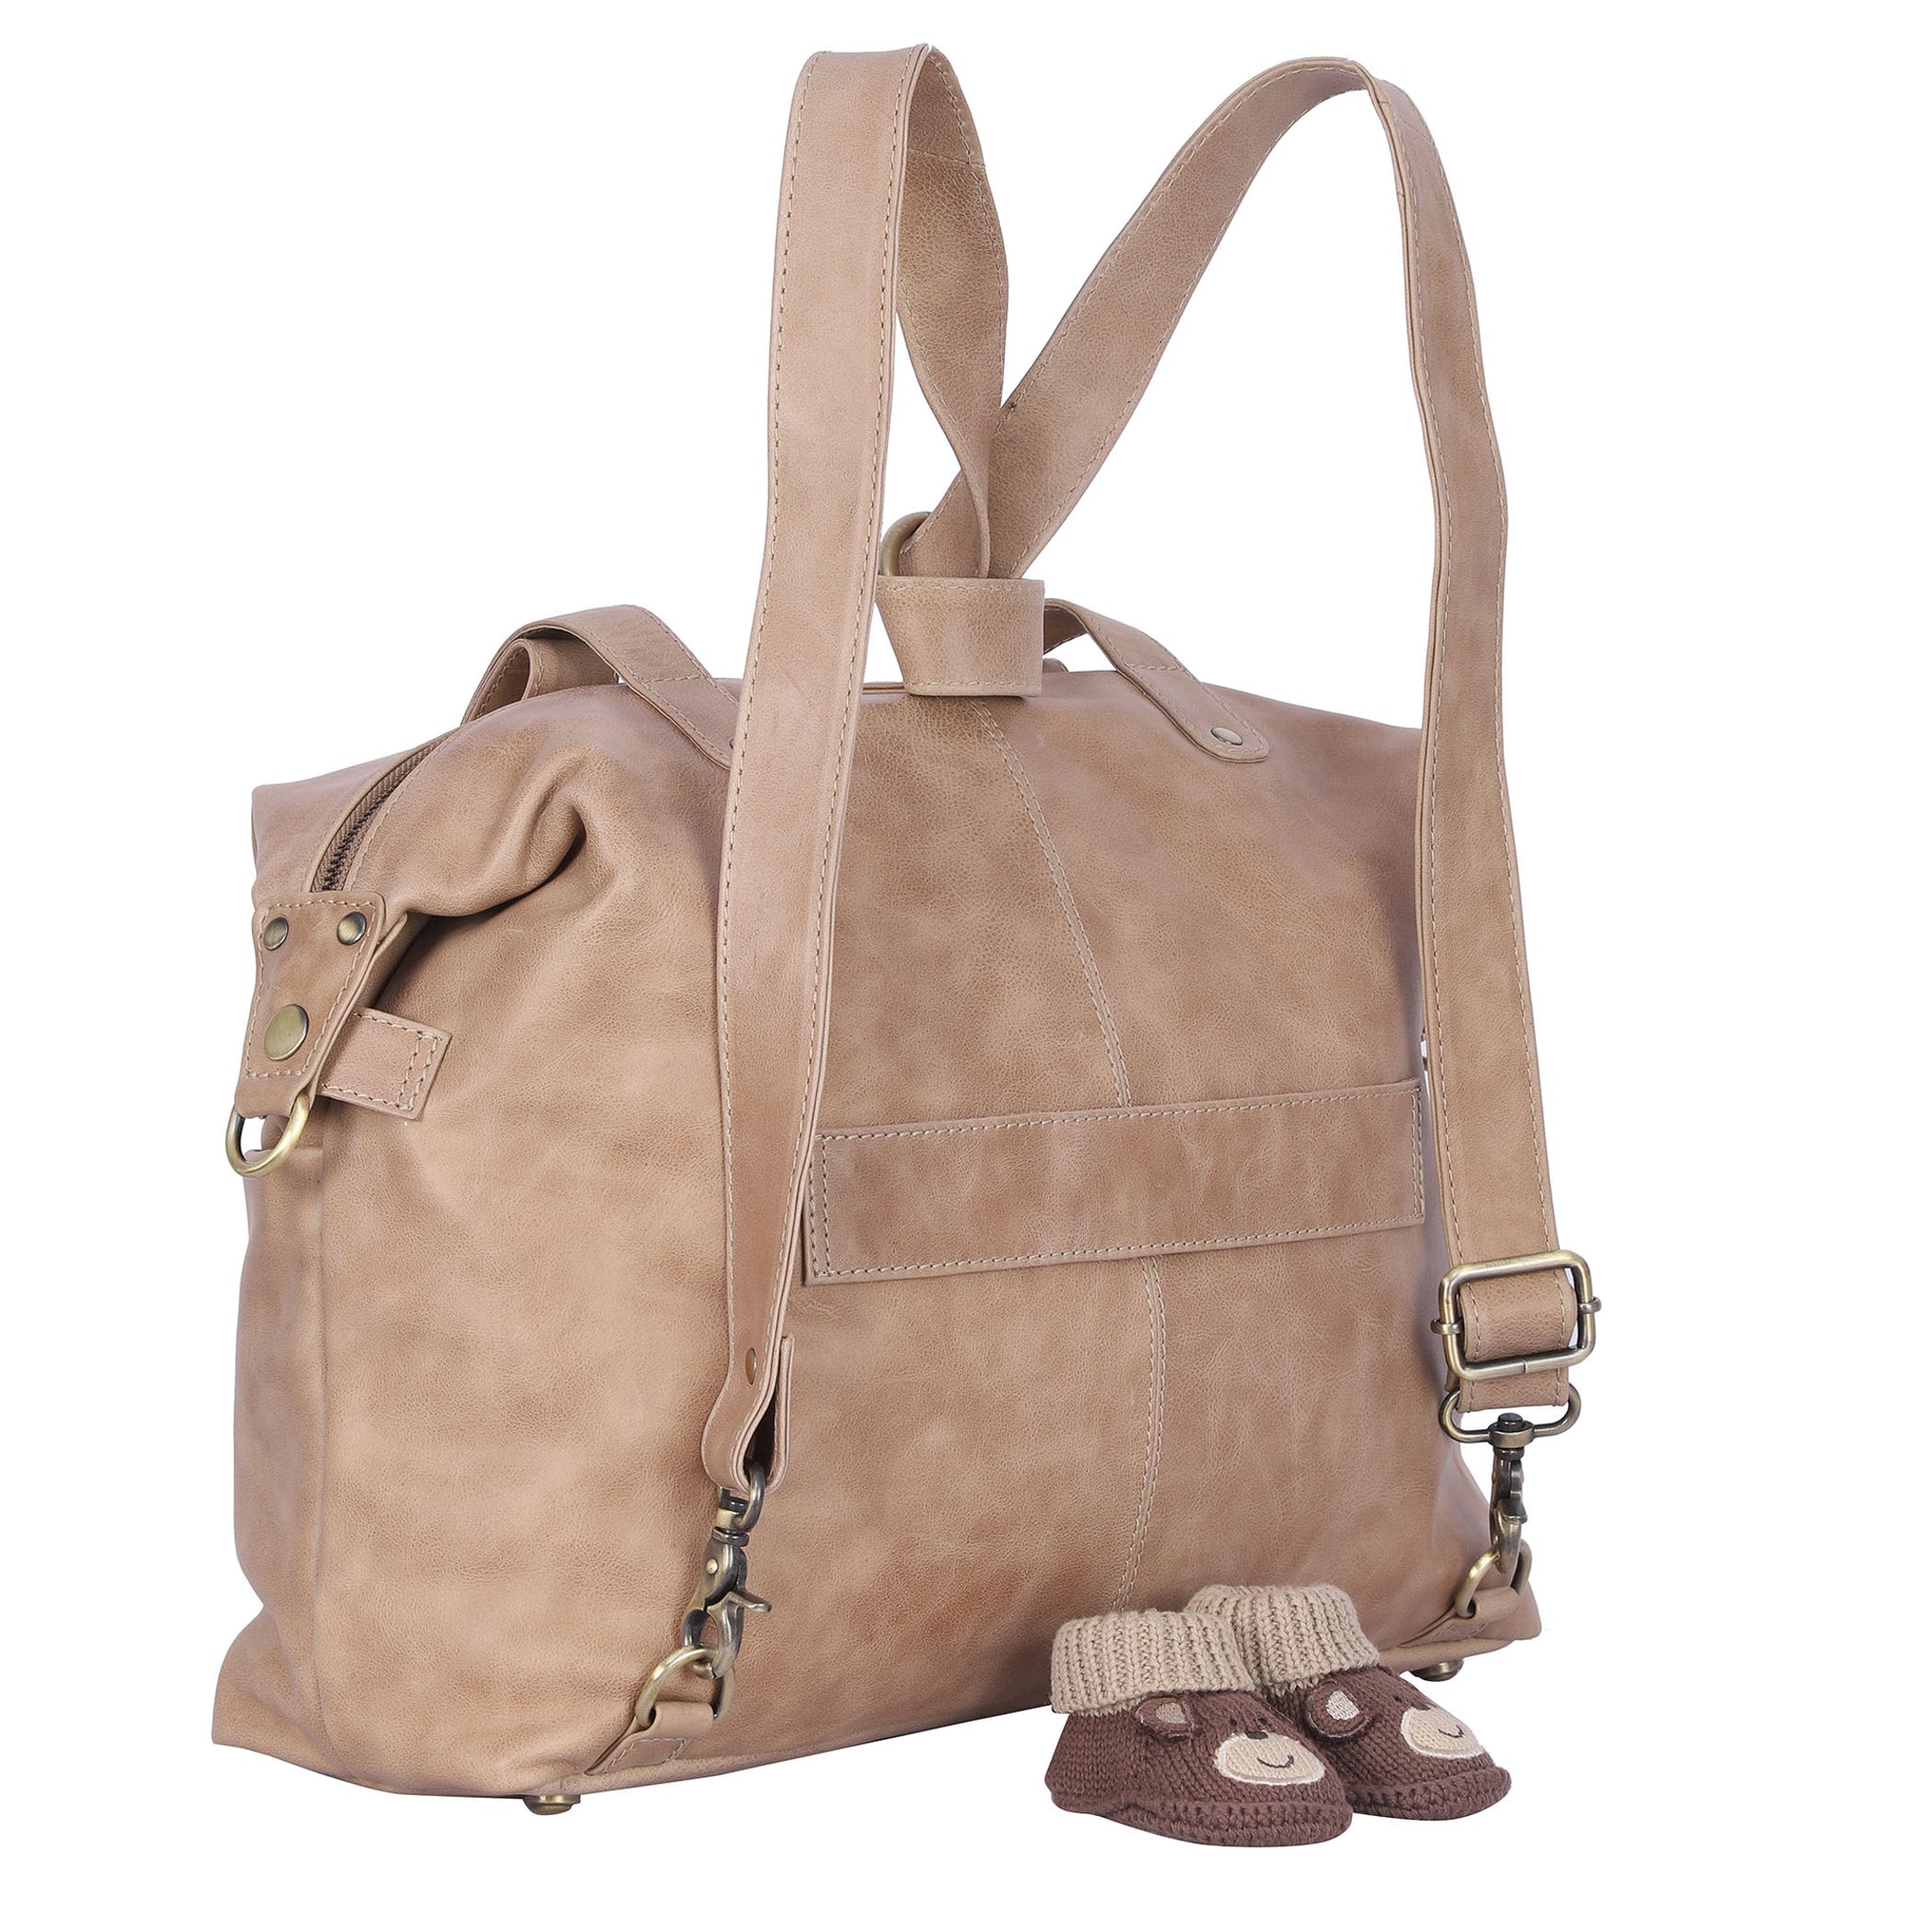 M8 Convertible 3-in-1 Crossbody Backpack Purse in Camel Color